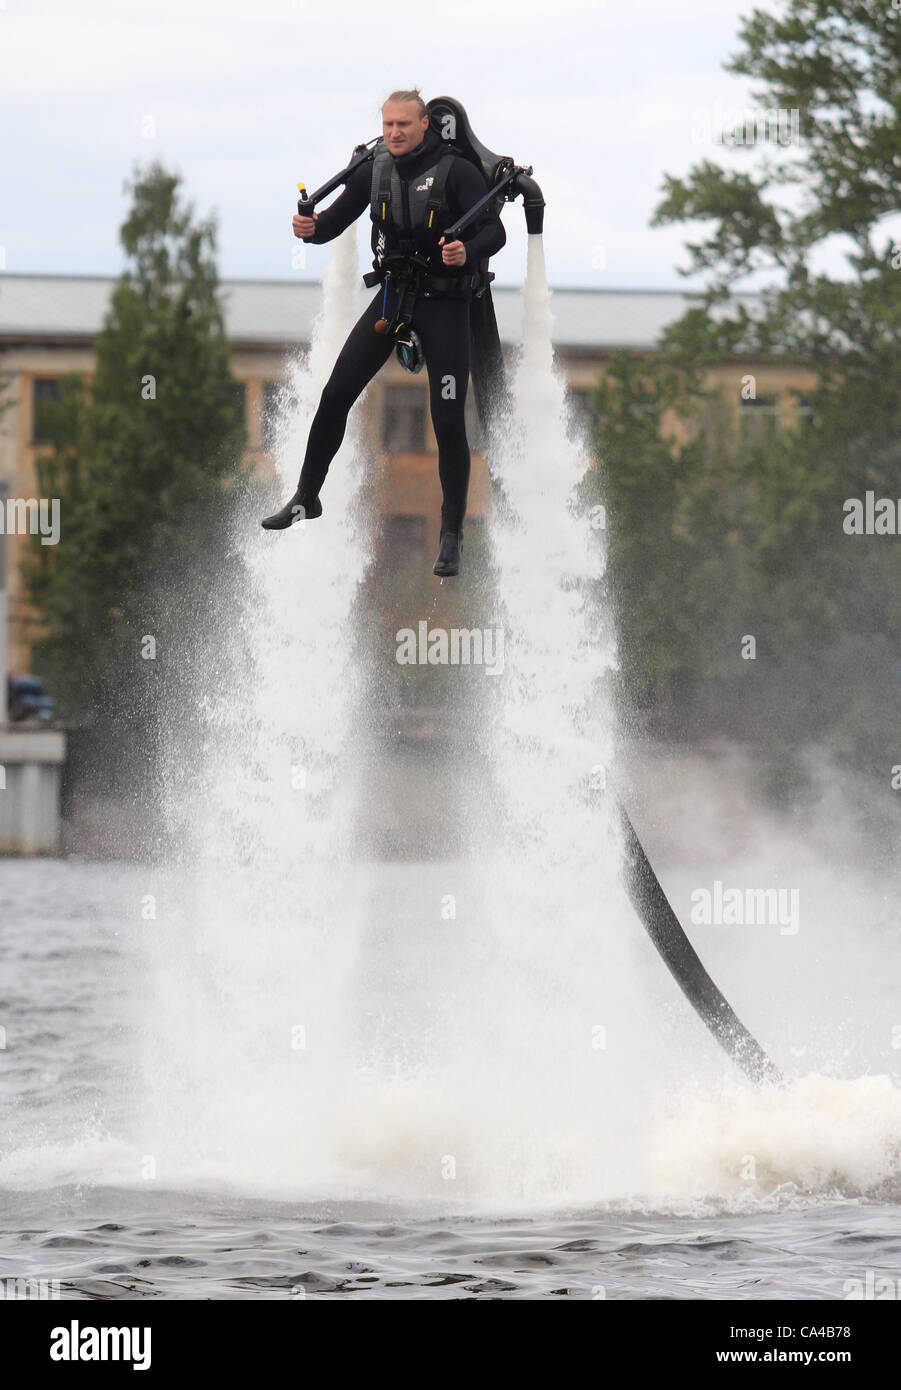 May 31, 2012 - St. Petersburg, Russia - May 31,2012.St.Petersburg,Russia. Pictured: Presentation of The Jetlev-Flyer jetpack at Baltic Marine Festival 2012.The Jetlev-Flyer is a personal jet pack for the water sports set.The Jetlev-Flyer is a James Bond-like jetpack powered by high-pressure water. ( Stock Photo